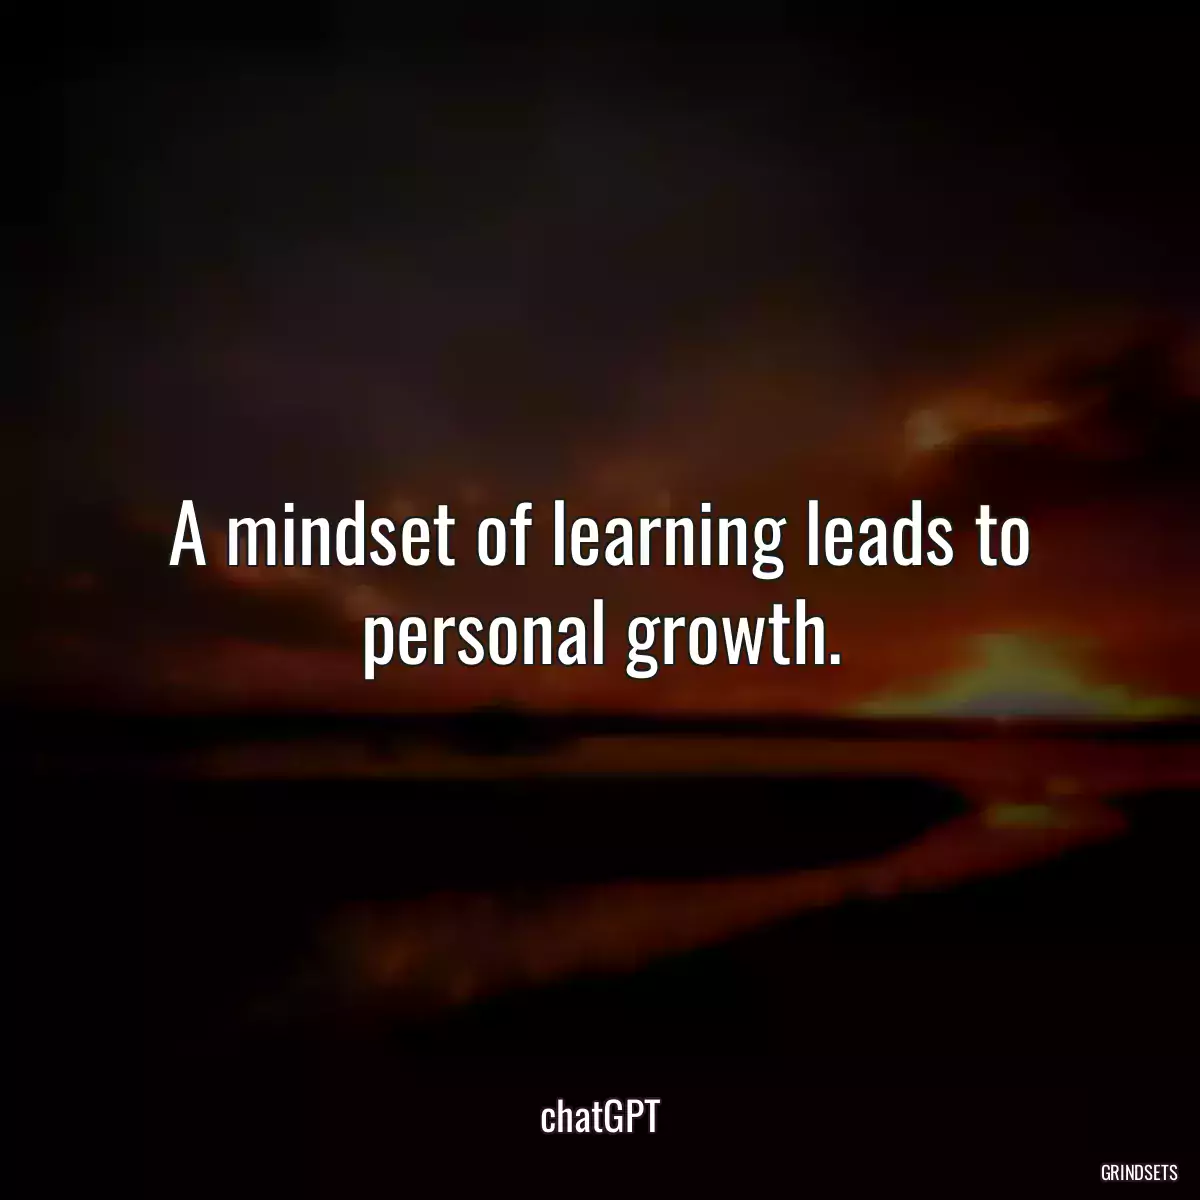 A mindset of learning leads to personal growth.